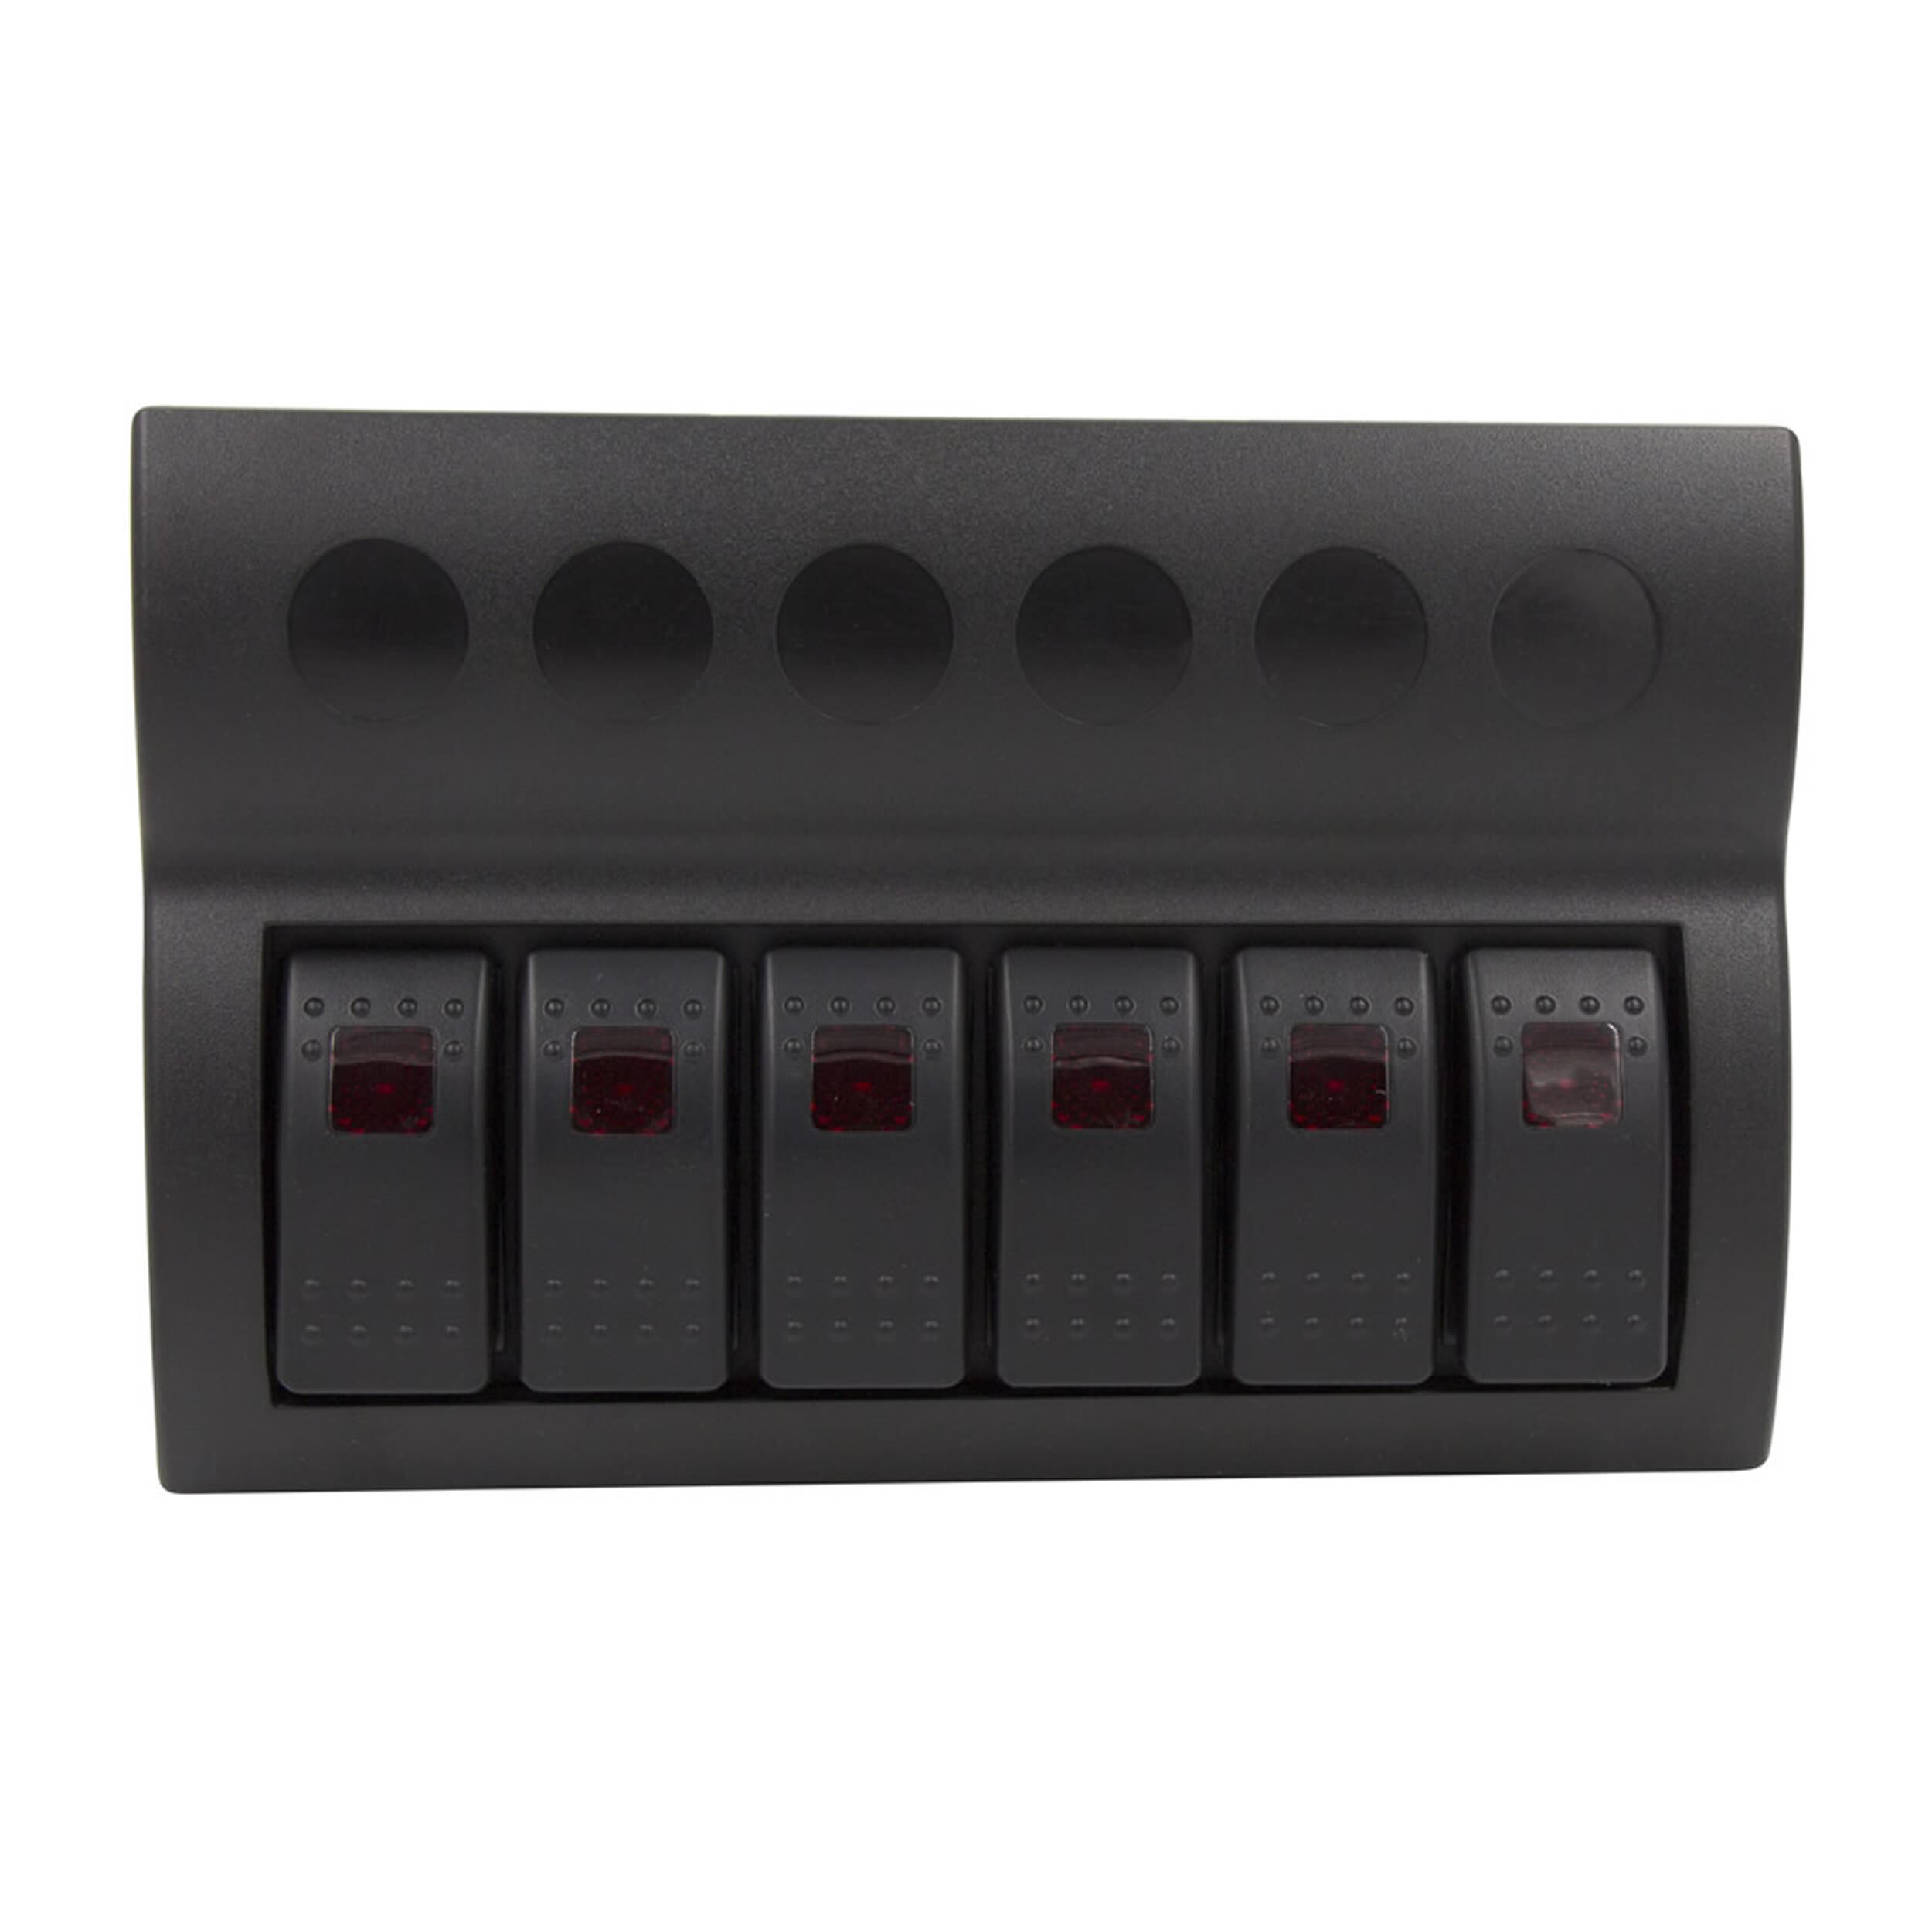 Panel Switches - 6 Switch Panel - Each